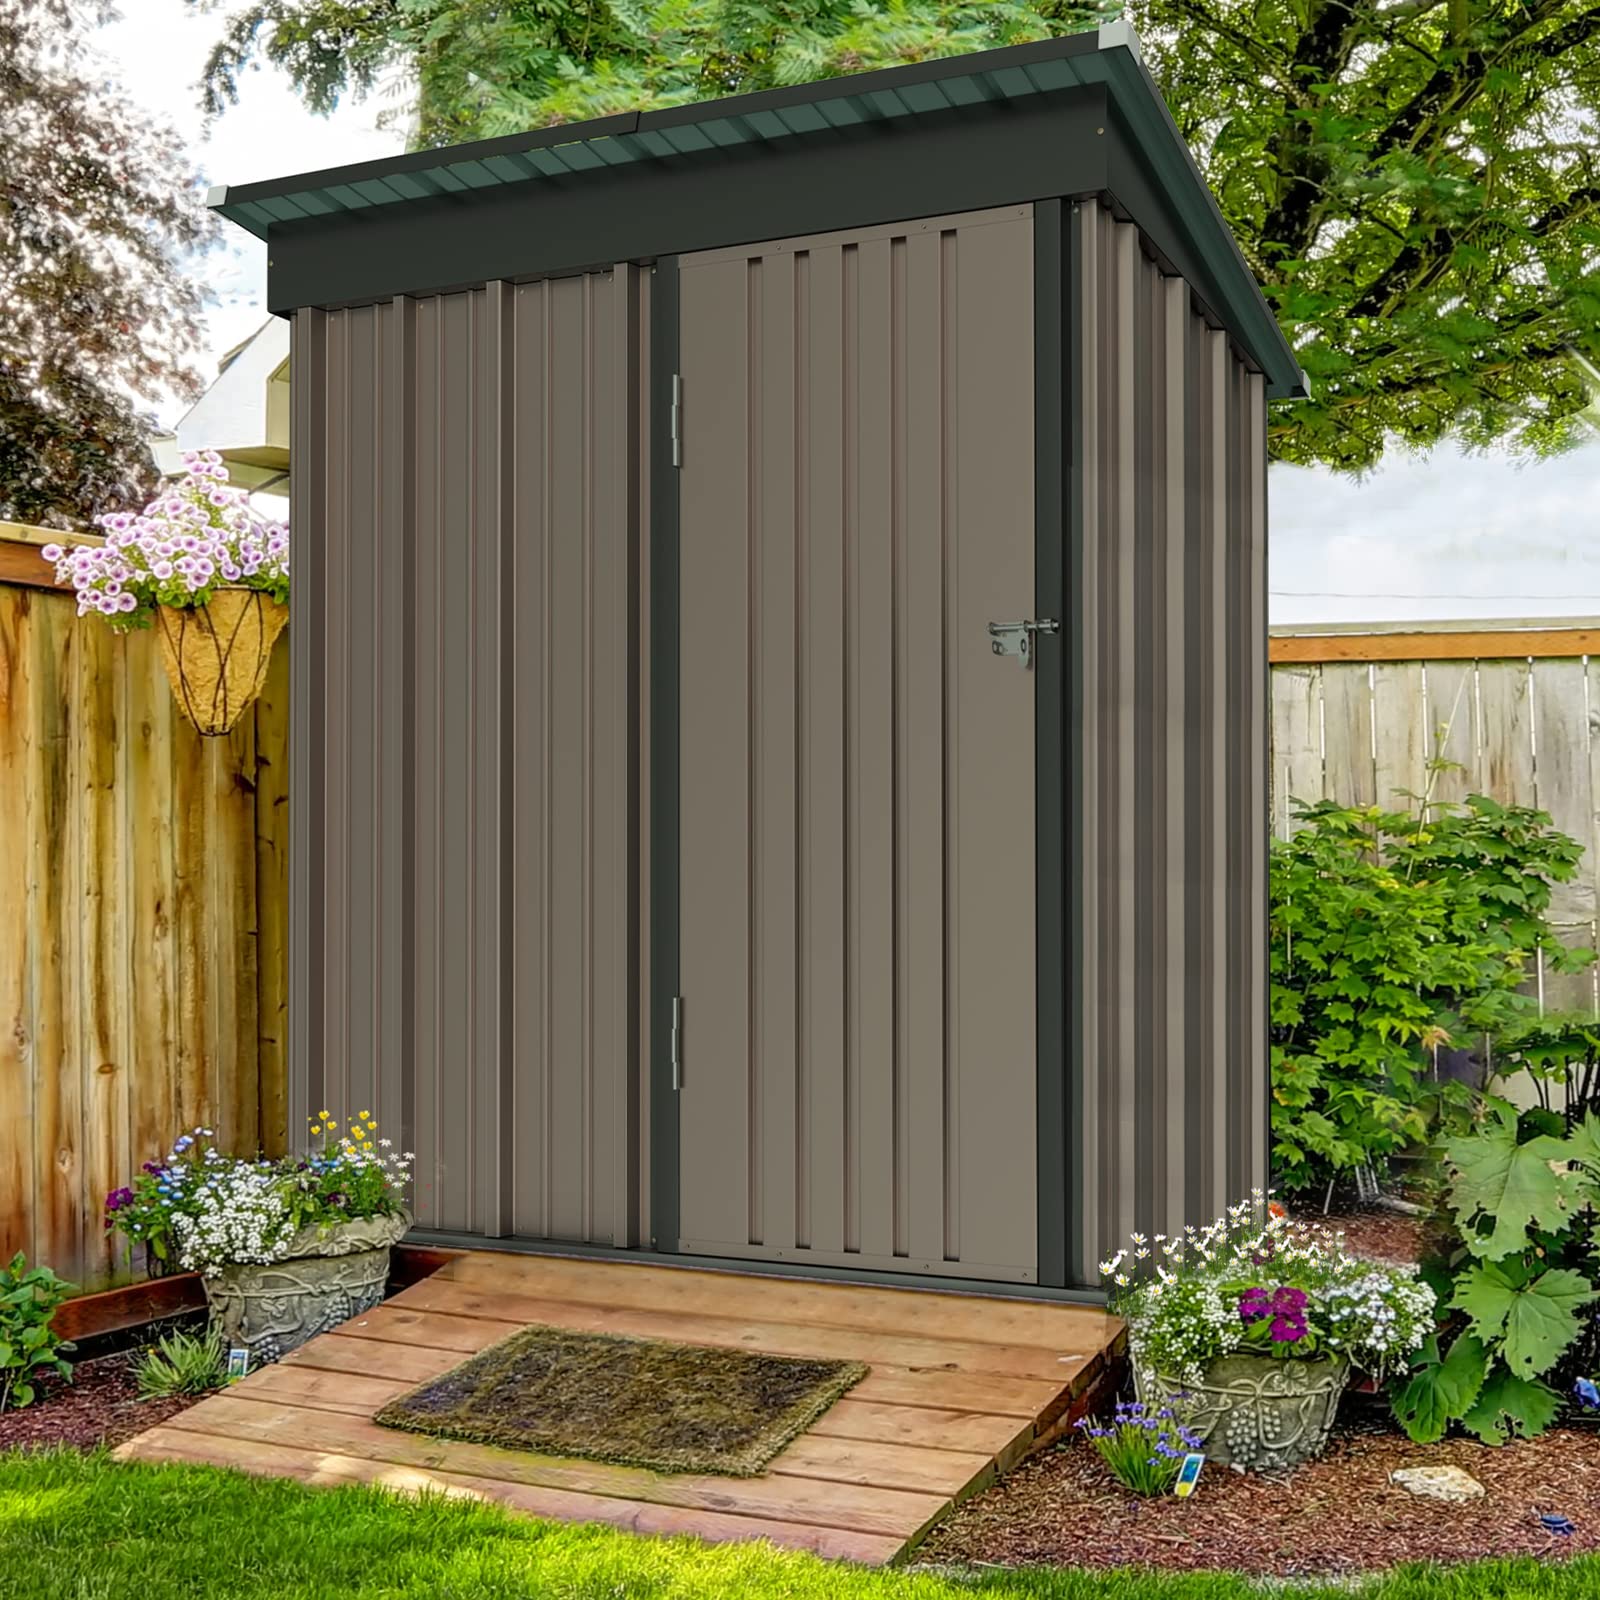 How To Make A Shed Waterproof